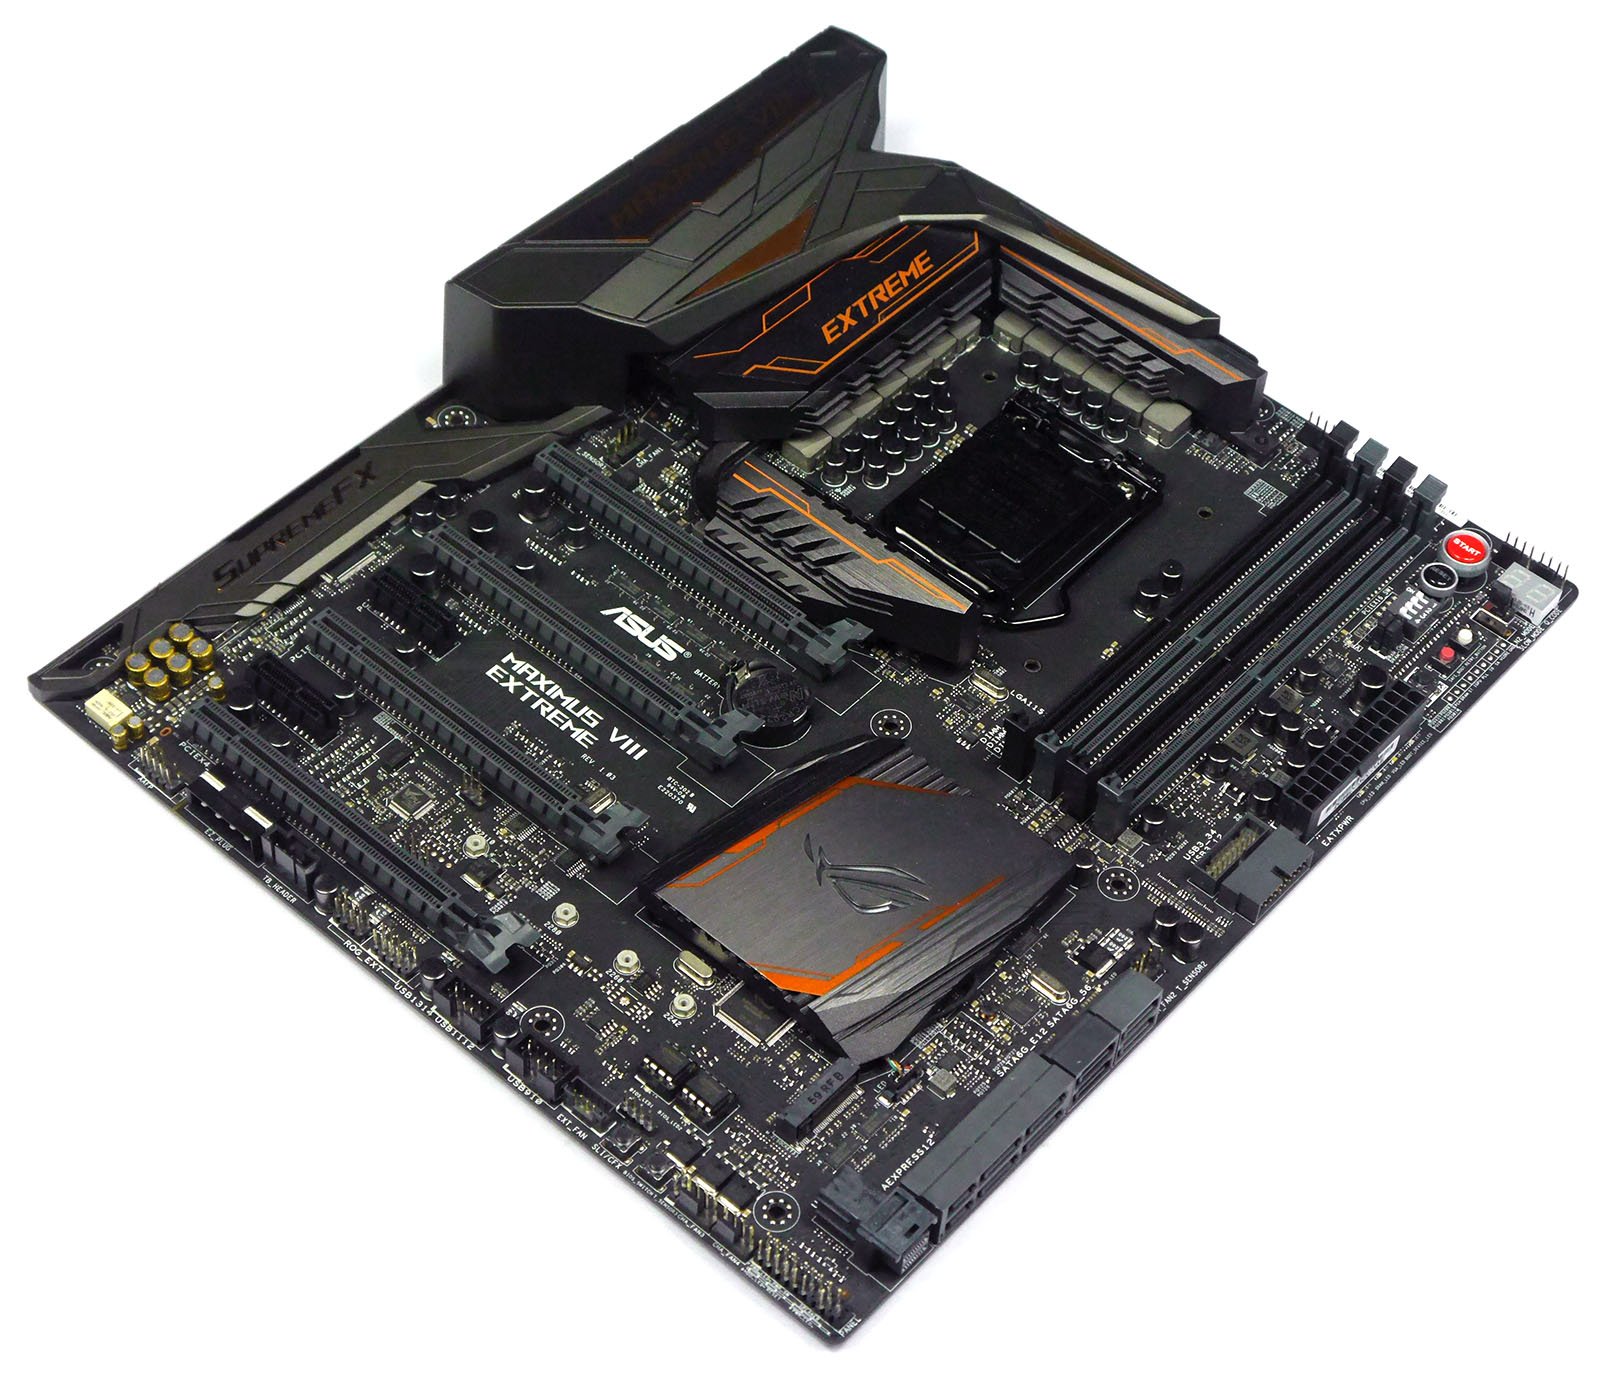 ASUS Maximus VIII Extreme Assembly - Overview